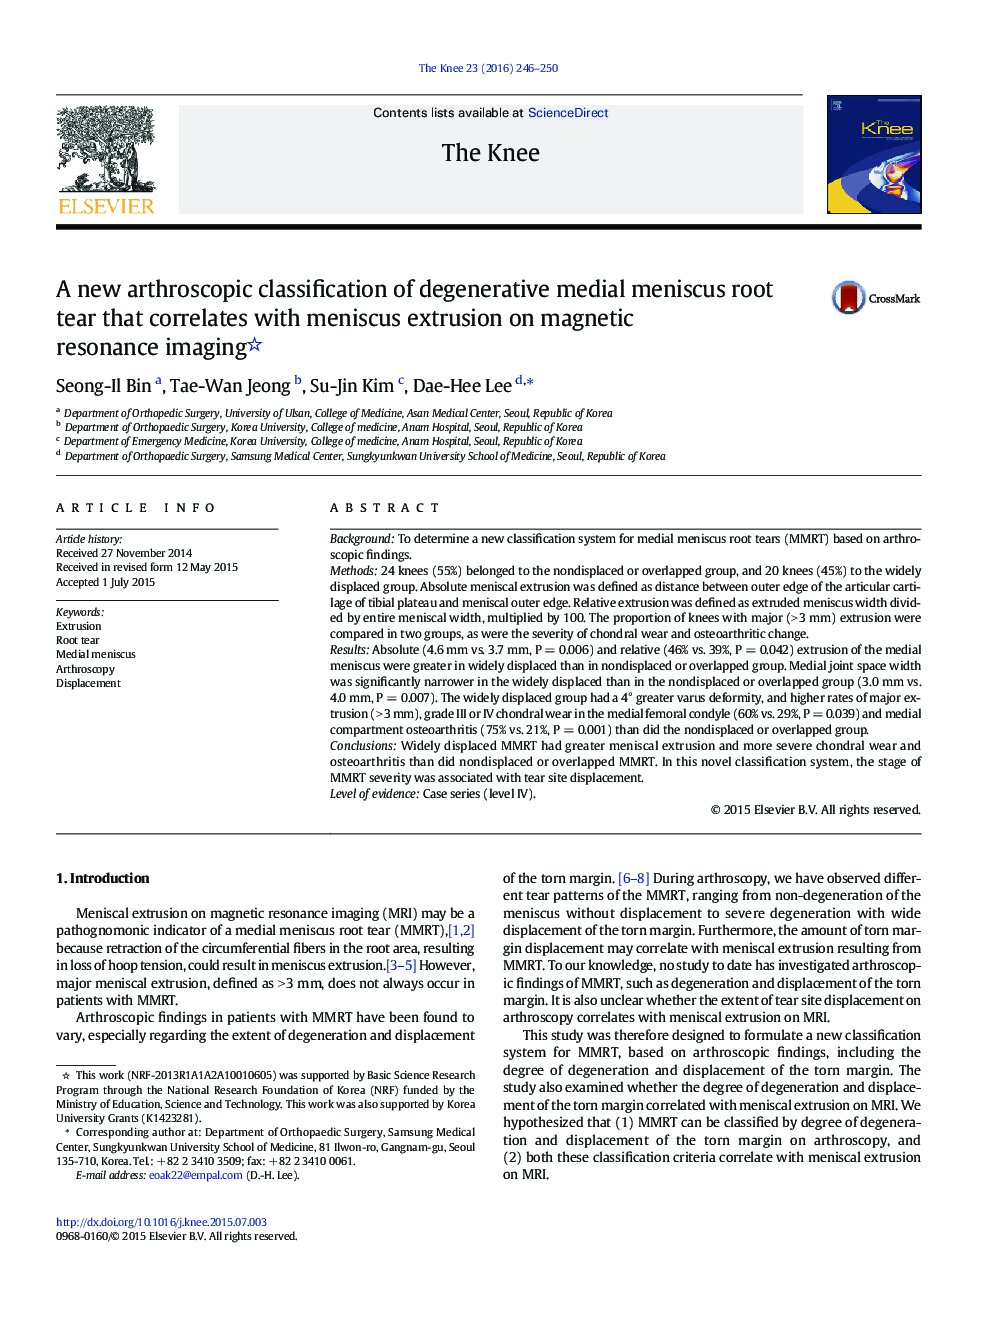 A new arthroscopic classification of degenerative medial meniscus root tear that correlates with meniscus extrusion on magnetic resonance imaging 